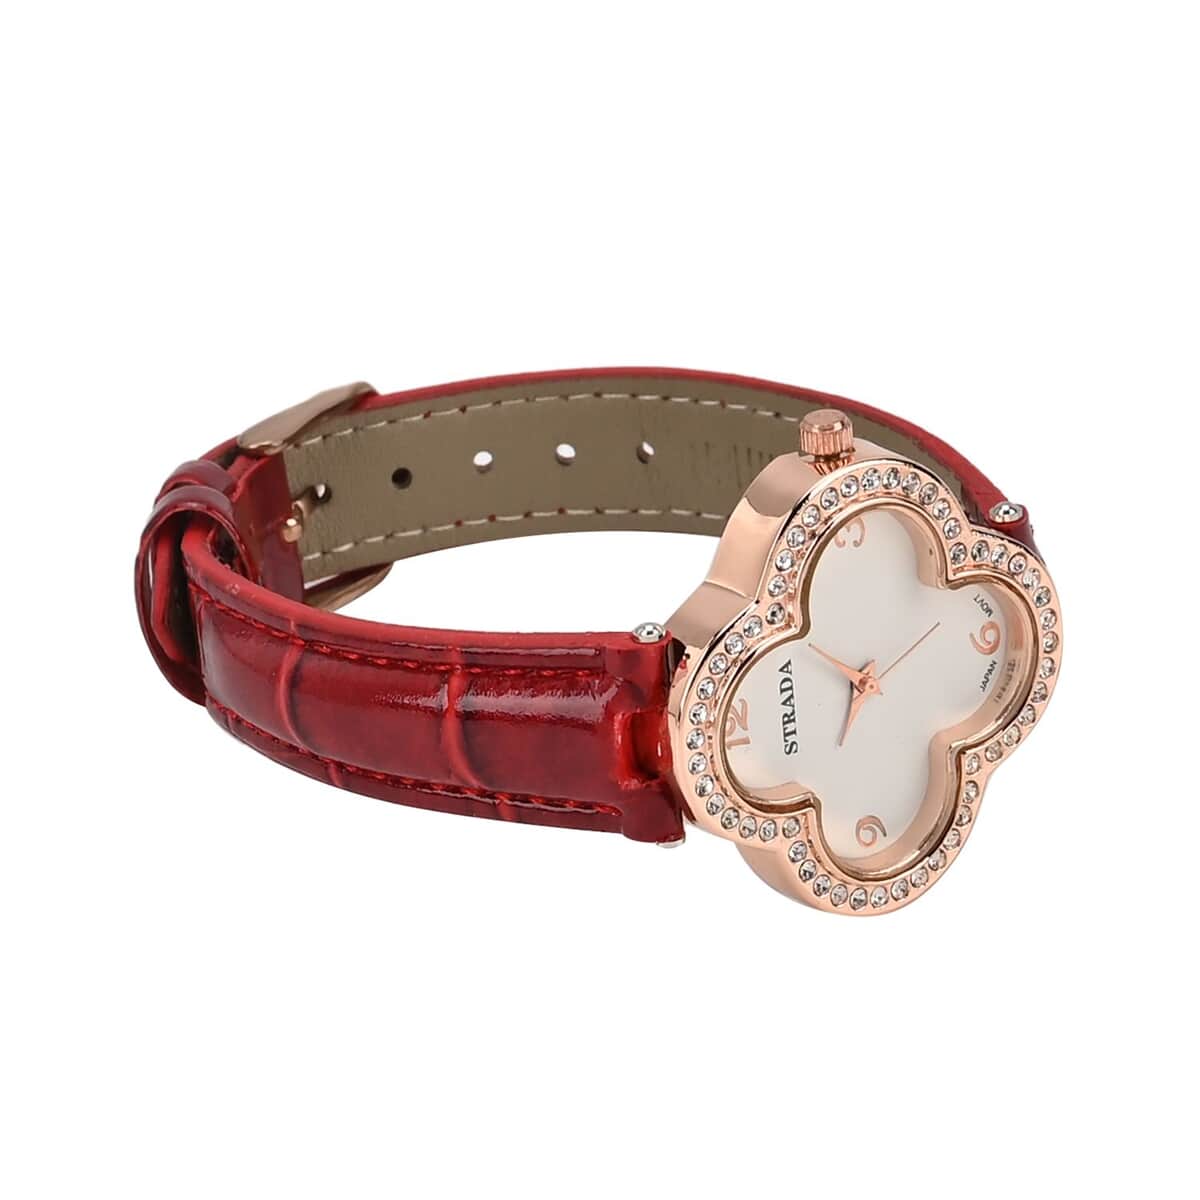 Strada Austrian Crystal Japanese Movement Four Clover Leaf Pattern Watch in Rosetone with Red Faux Leather Strap (36.57mm) (6.5-8.5 Inches) image number 5